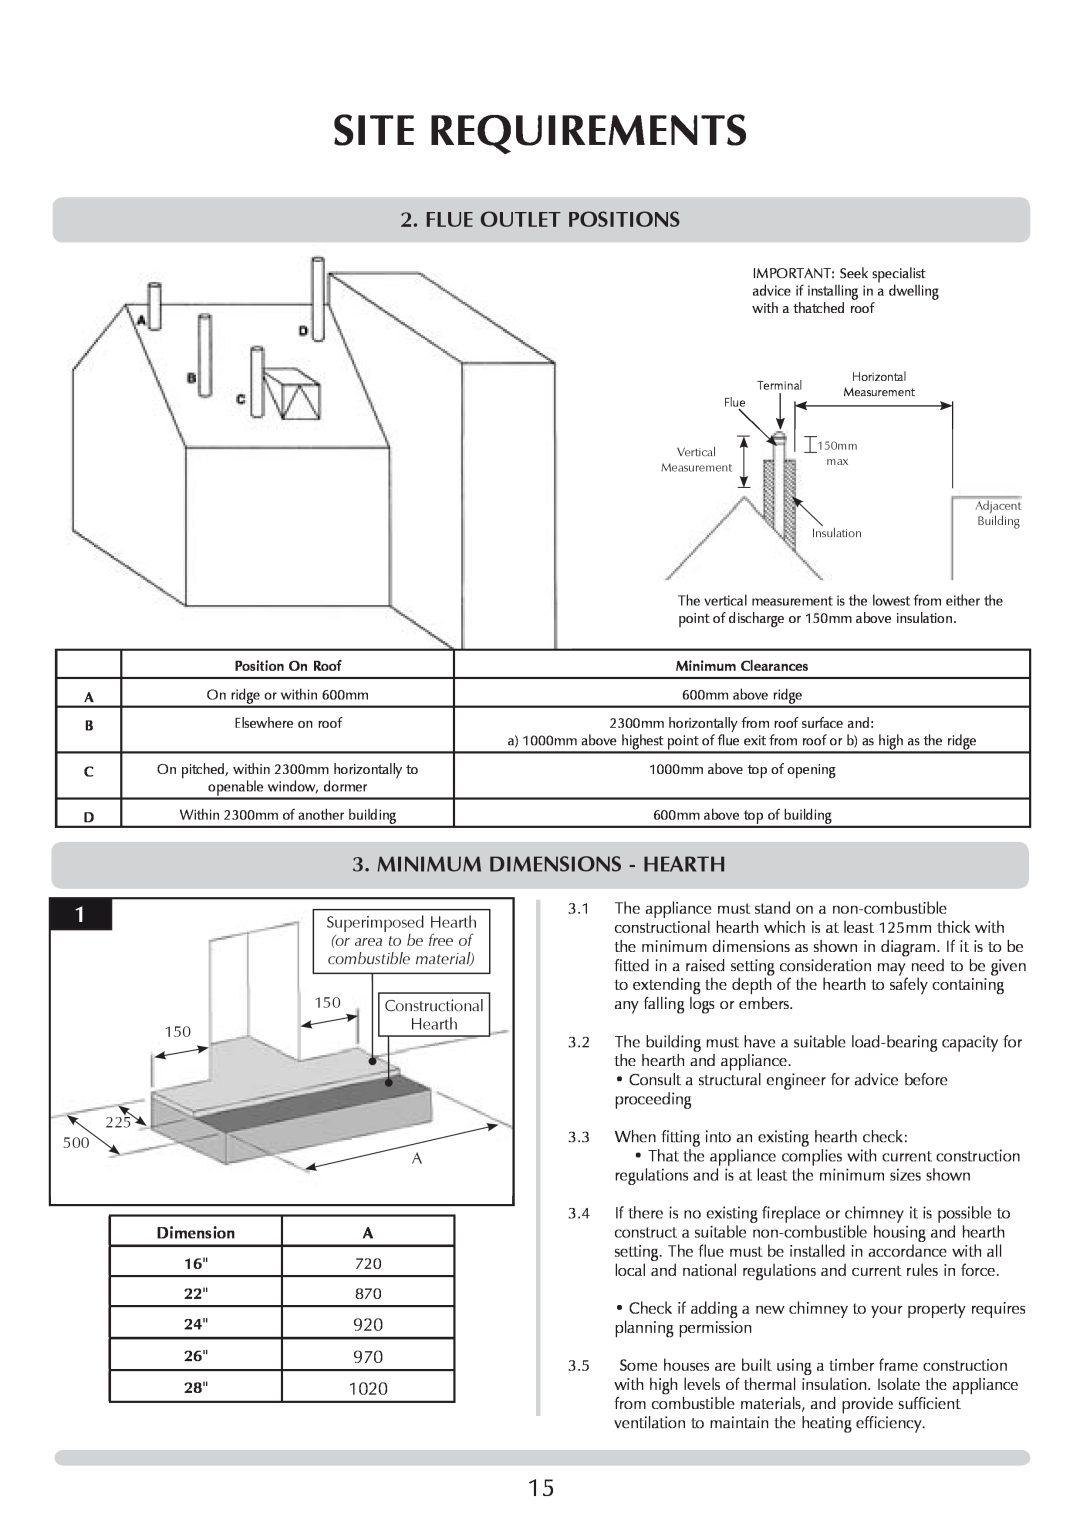 Stovax PM219 manual Flue Outlet Positions, Minimum dimensions - HEARTH, Site Requirements 